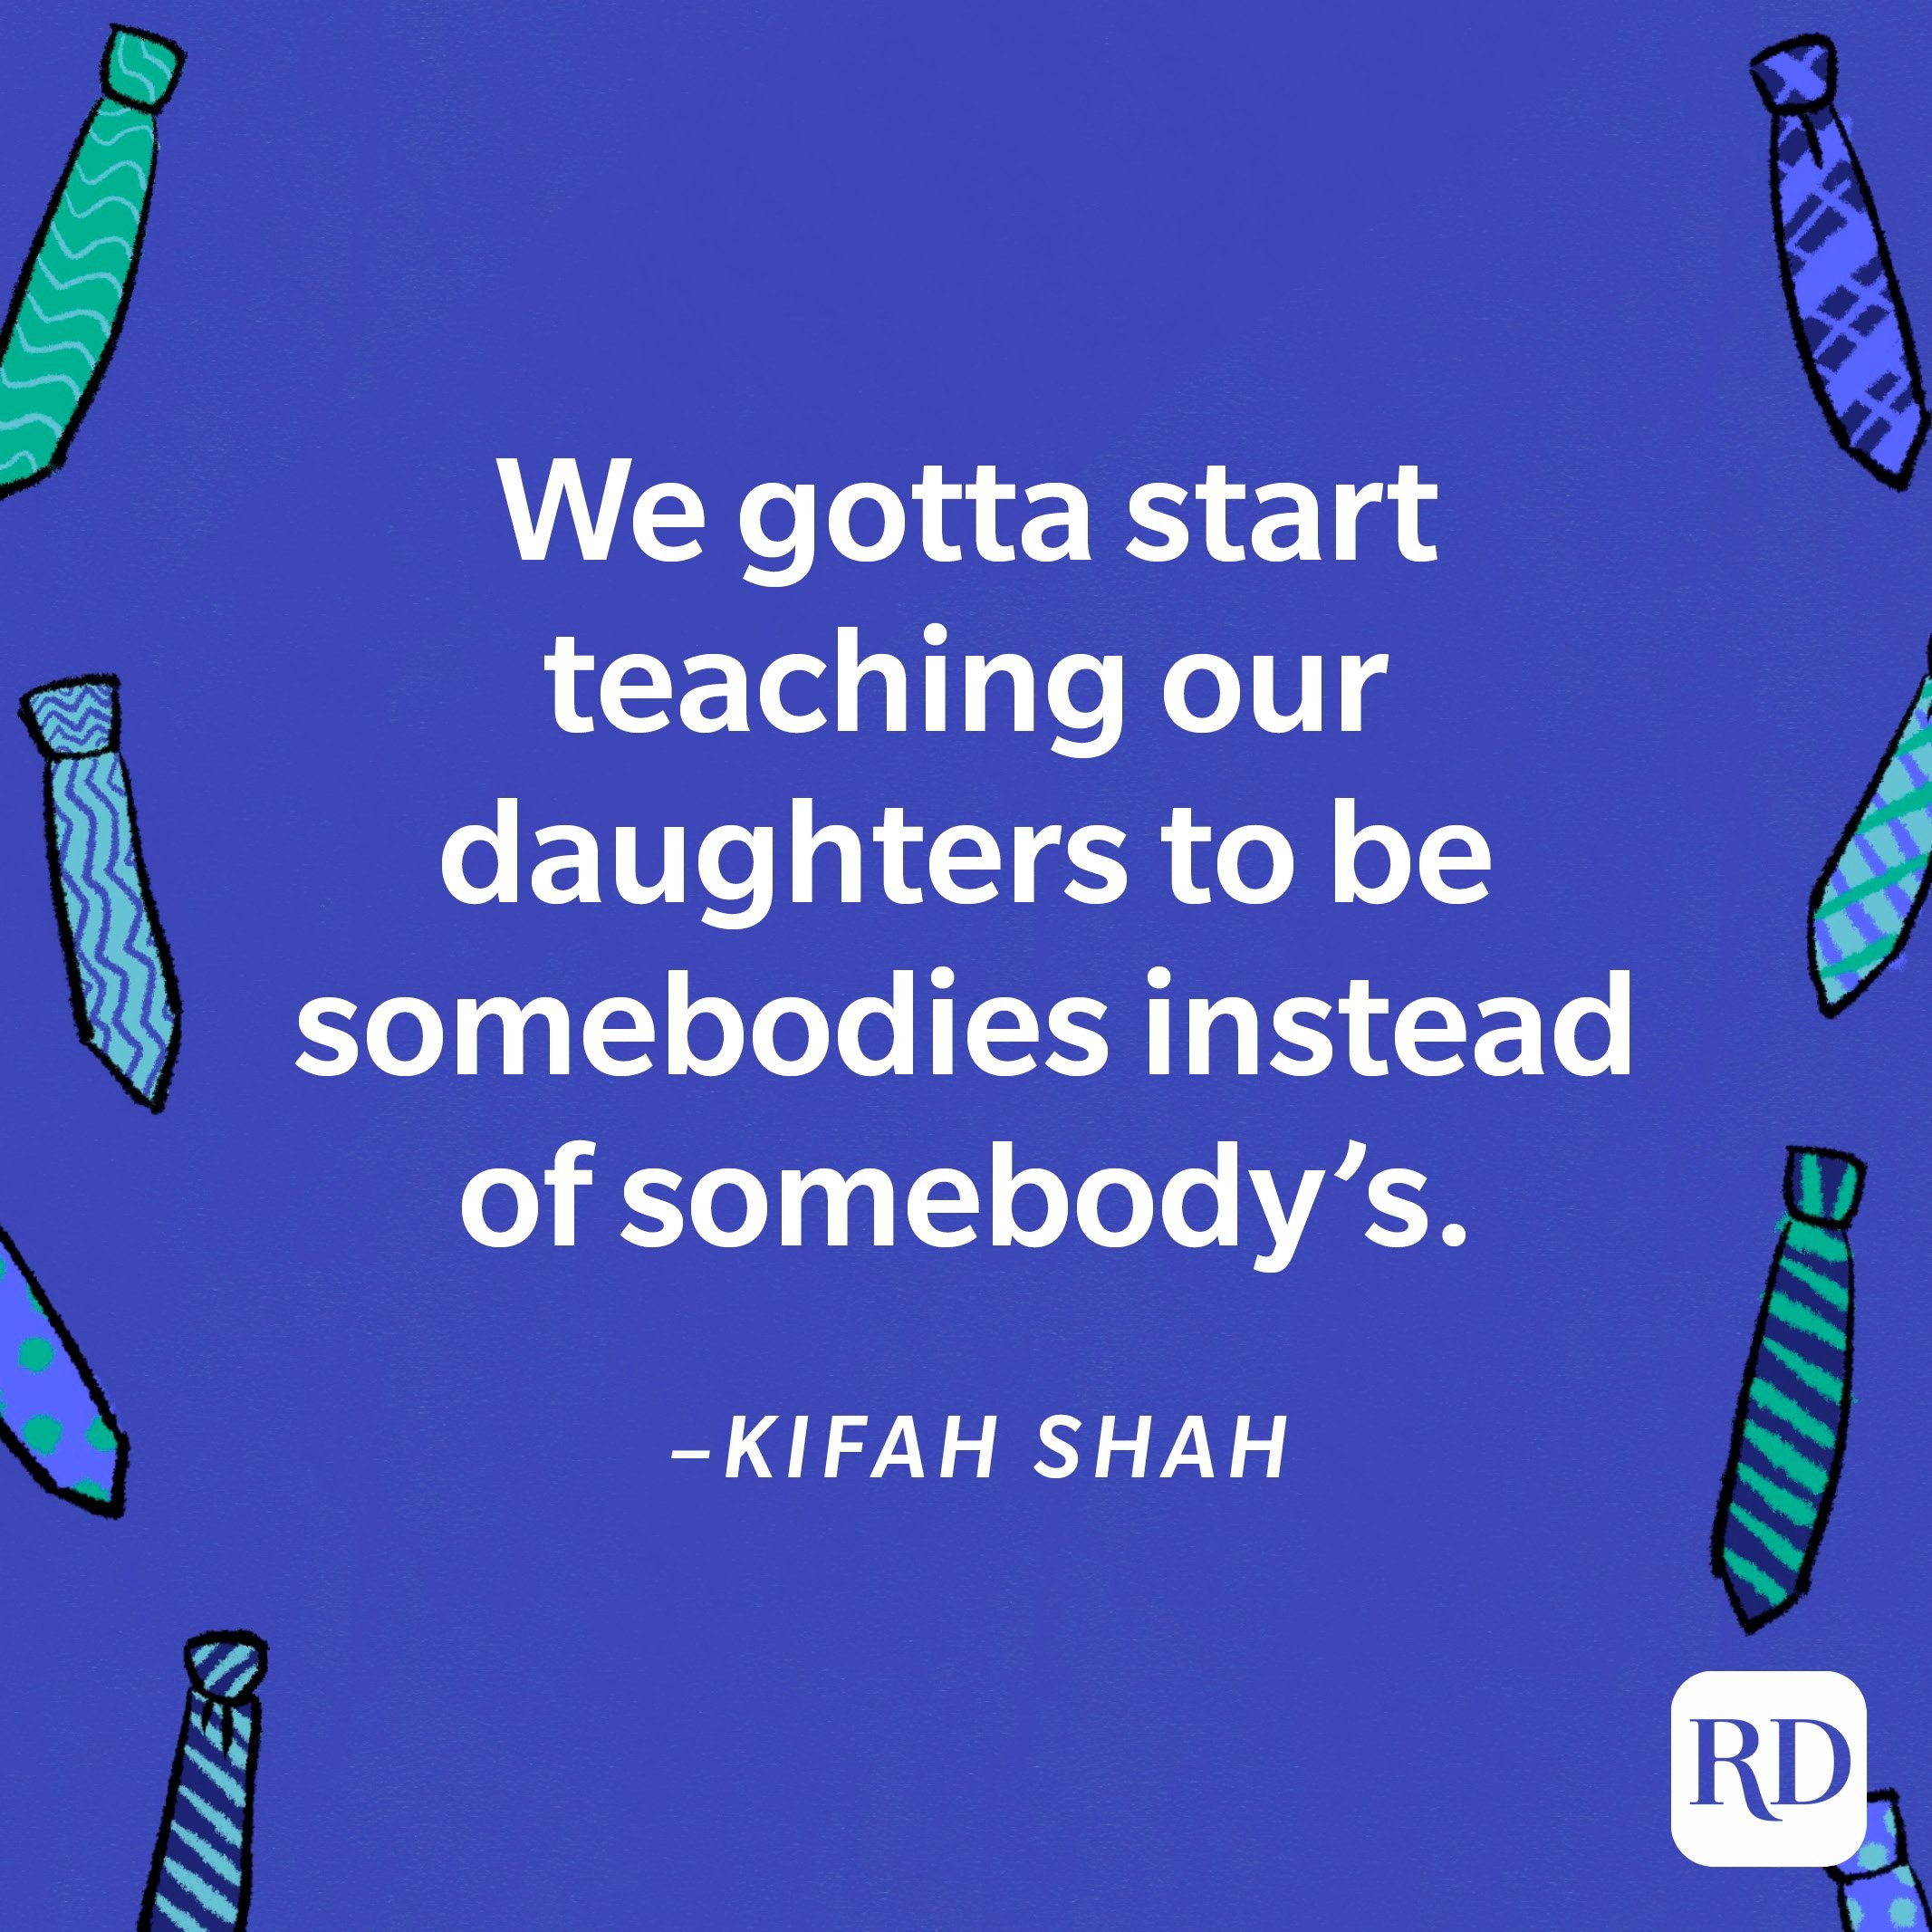 "We gotta start teaching our daughters to be somebodies instead of somebody’s."—Kifah Shah 19